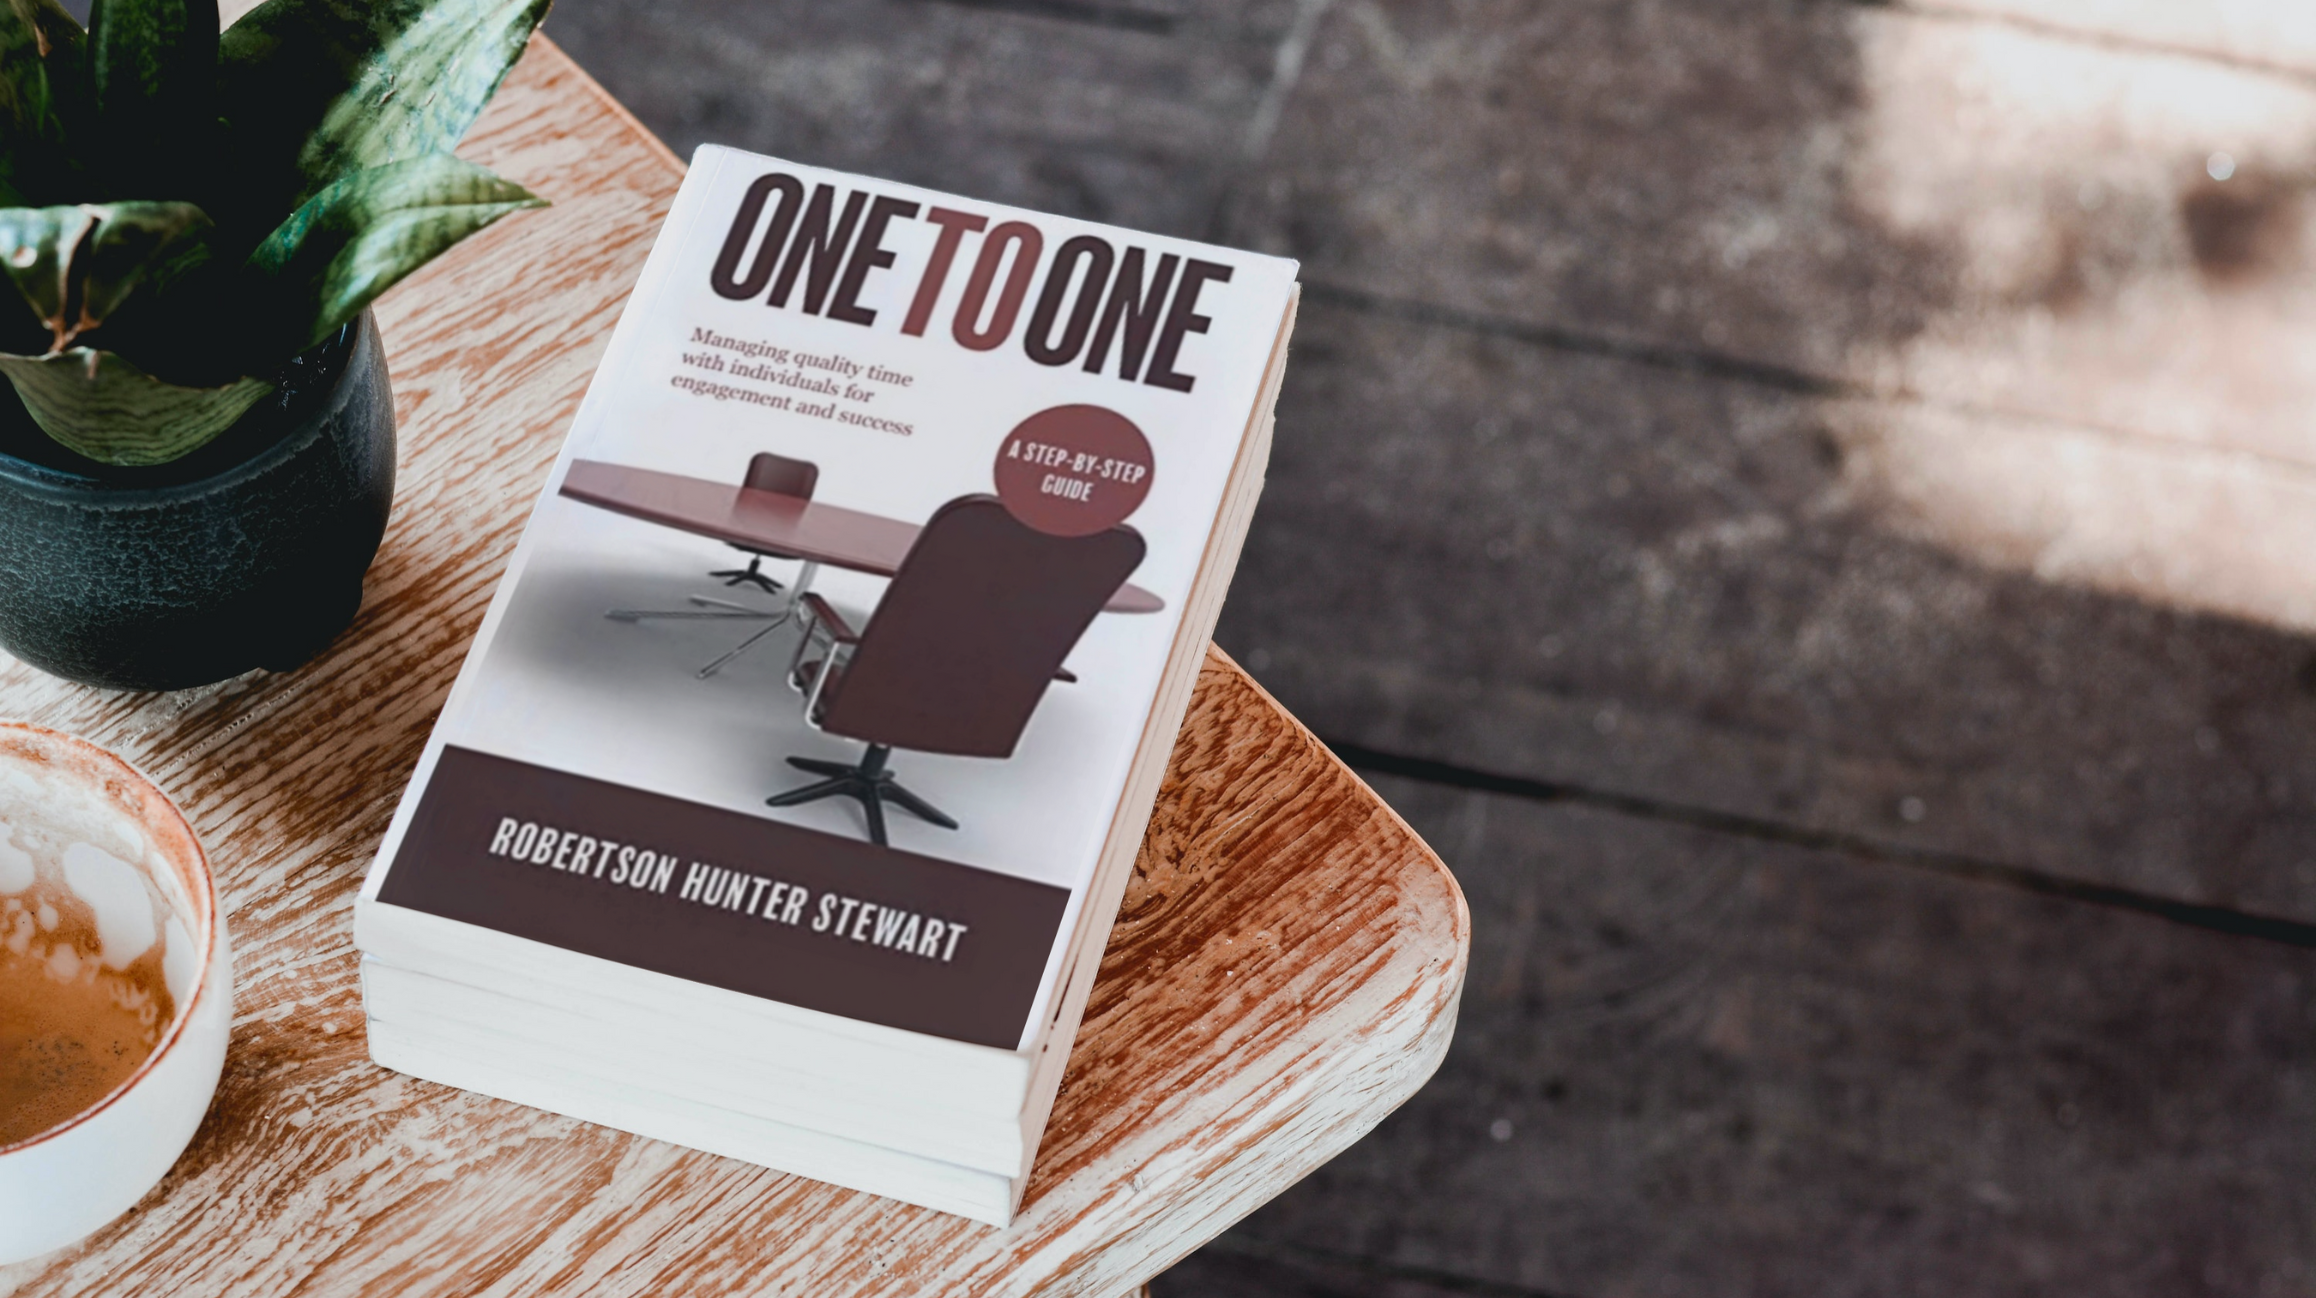 One to One by Robertson Hunter Stewart